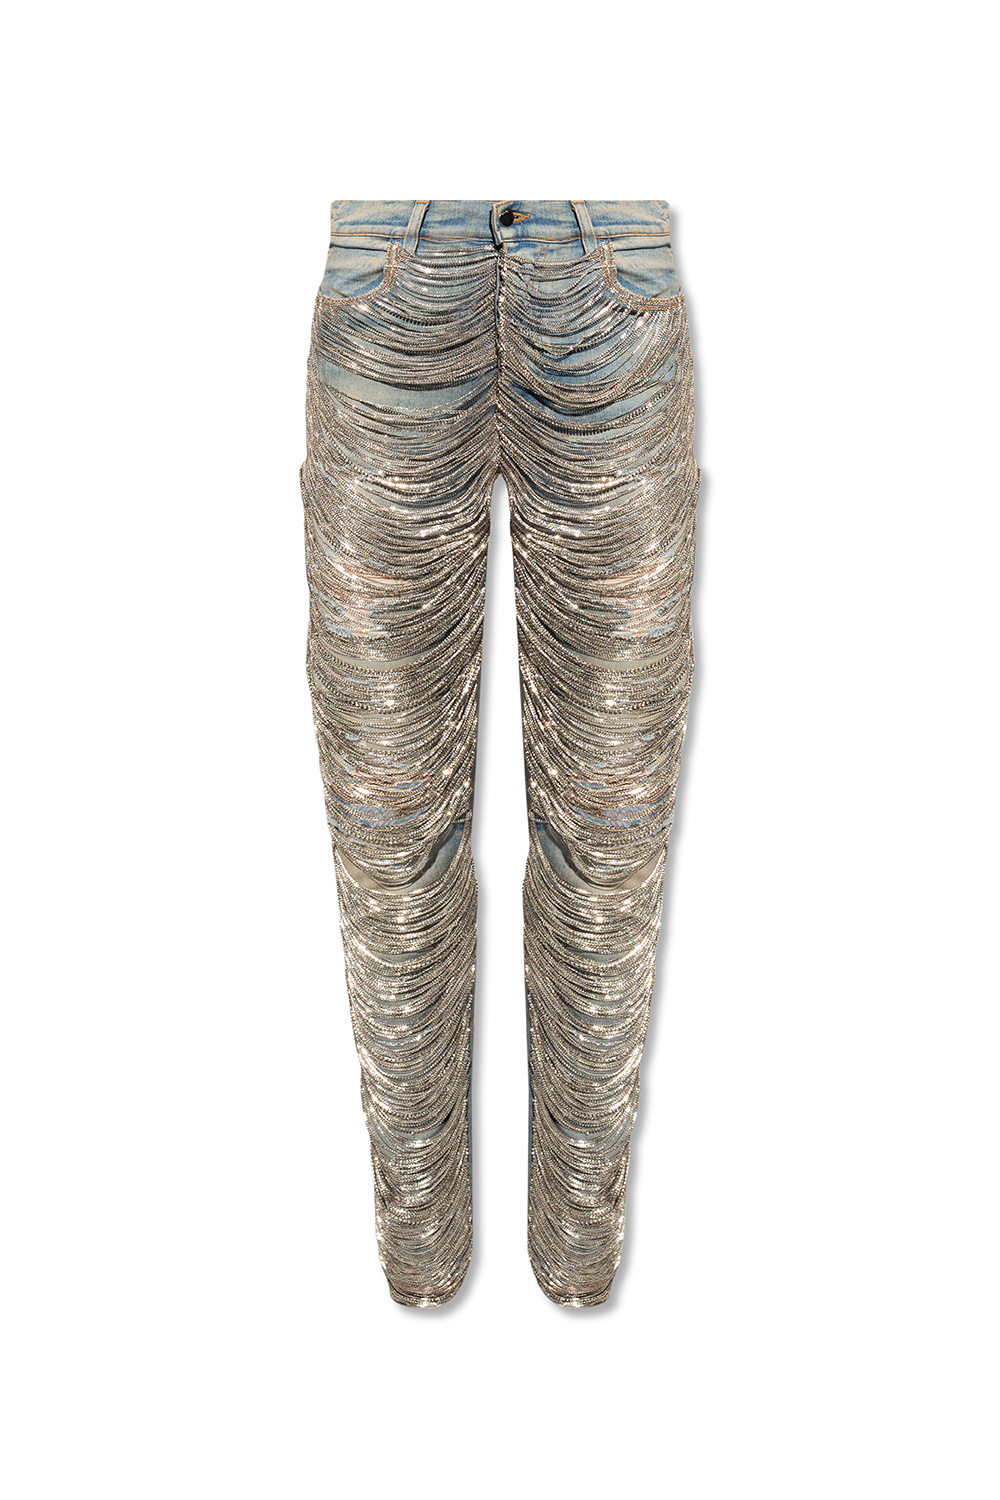 Blue Jeans with decorative chains Amiri - IetpShops GB - Levis 501 High  Rise Rolled Womens Shorts